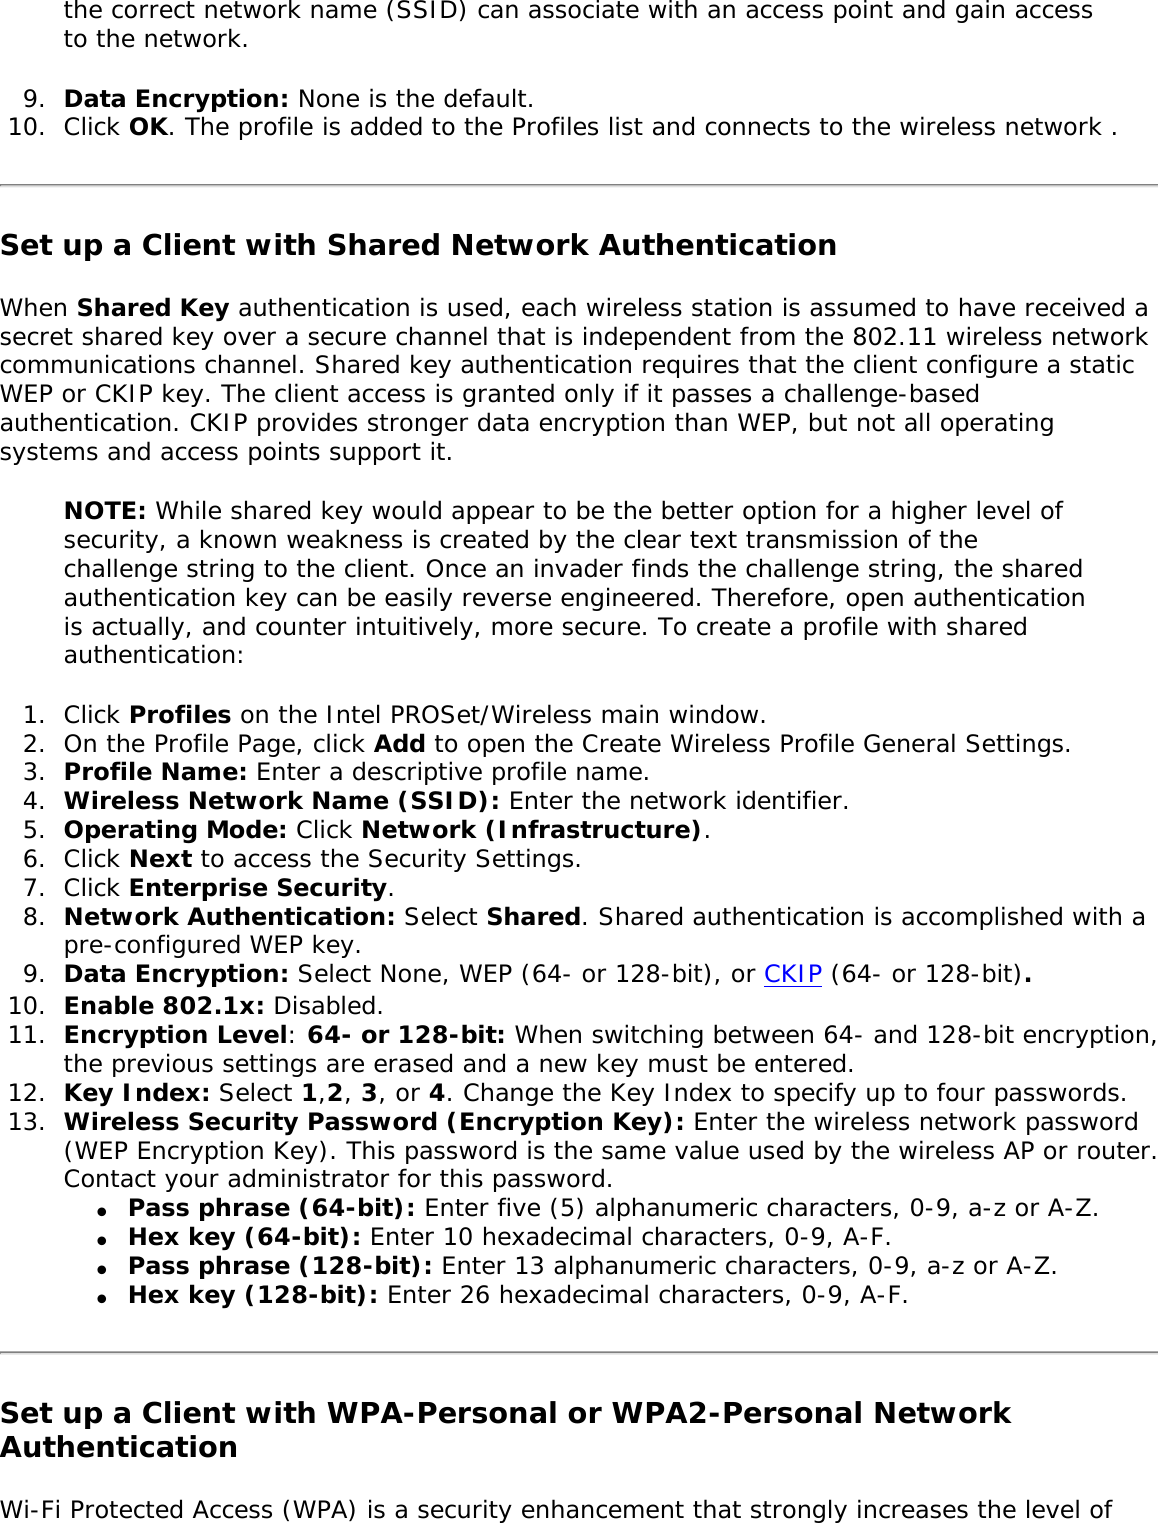 the correct network name (SSID) can associate with an access point and gain access to the network. 9.  Data Encryption: None is the default. 10.  Click OK. The profile is added to the Profiles list and connects to the wireless network . Set up a Client with Shared Network AuthenticationWhen Shared Key authentication is used, each wireless station is assumed to have received a secret shared key over a secure channel that is independent from the 802.11 wireless network communications channel. Shared key authentication requires that the client configure a static WEP or CKIP key. The client access is granted only if it passes a challenge-based authentication. CKIP provides stronger data encryption than WEP, but not all operating systems and access points support it. NOTE: While shared key would appear to be the better option for a higher level of security, a known weakness is created by the clear text transmission of the challenge string to the client. Once an invader finds the challenge string, the shared authentication key can be easily reverse engineered. Therefore, open authentication is actually, and counter intuitively, more secure. To create a profile with shared authentication: 1.  Click Profiles on the Intel PROSet/Wireless main window. 2.  On the Profile Page, click Add to open the Create Wireless Profile General Settings.3.  Profile Name: Enter a descriptive profile name.4.  Wireless Network Name (SSID): Enter the network identifier. 5.  Operating Mode: Click Network (Infrastructure). 6.  Click Next to access the Security Settings. 7.  Click Enterprise Security. 8.  Network Authentication: Select Shared. Shared authentication is accomplished with a pre-configured WEP key. 9.  Data Encryption: Select None, WEP (64- or 128-bit), or CKIP (64- or 128-bit).10.  Enable 802.1x: Disabled. 11.  Encryption Level: 64- or 128-bit: When switching between 64- and 128-bit encryption, the previous settings are erased and a new key must be entered. 12.  Key Index: Select 1,2, 3, or 4. Change the Key Index to specify up to four passwords.13.  Wireless Security Password (Encryption Key): Enter the wireless network password (WEP Encryption Key). This password is the same value used by the wireless AP or router. Contact your administrator for this password. ●     Pass phrase (64-bit): Enter five (5) alphanumeric characters, 0-9, a-z or A-Z. ●     Hex key (64-bit): Enter 10 hexadecimal characters, 0-9, A-F. ●     Pass phrase (128-bit): Enter 13 alphanumeric characters, 0-9, a-z or A-Z. ●     Hex key (128-bit): Enter 26 hexadecimal characters, 0-9, A-F.Set up a Client with WPA-Personal or WPA2-Personal Network AuthenticationWi-Fi Protected Access (WPA) is a security enhancement that strongly increases the level of 